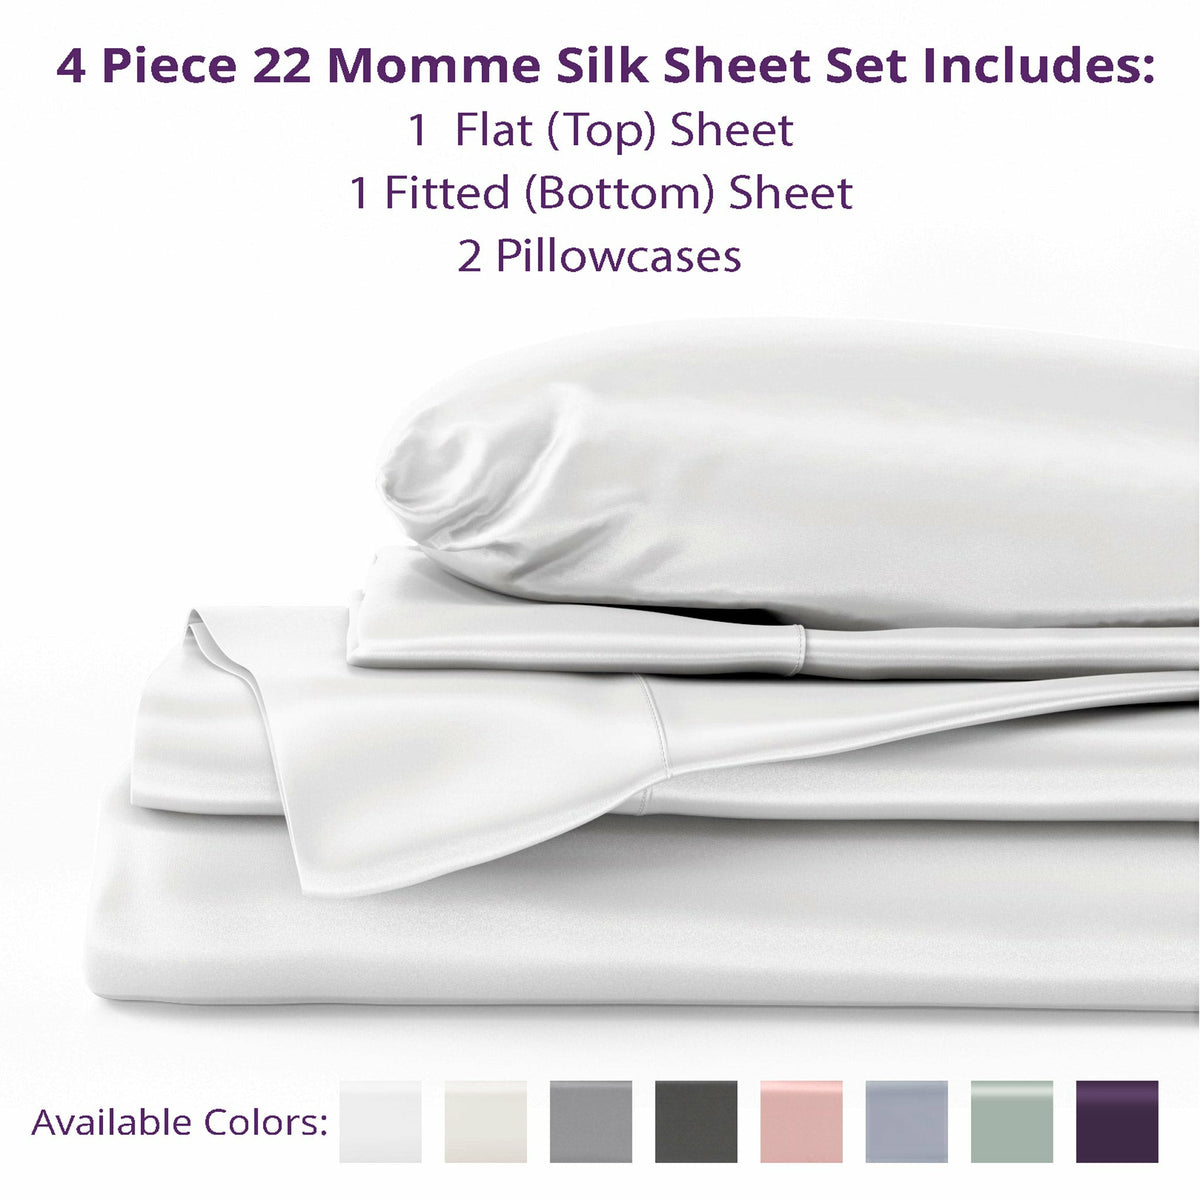 Mulberry Park Silks 22 Momme Silk Flat Sheets Inclusions White Fine Linens